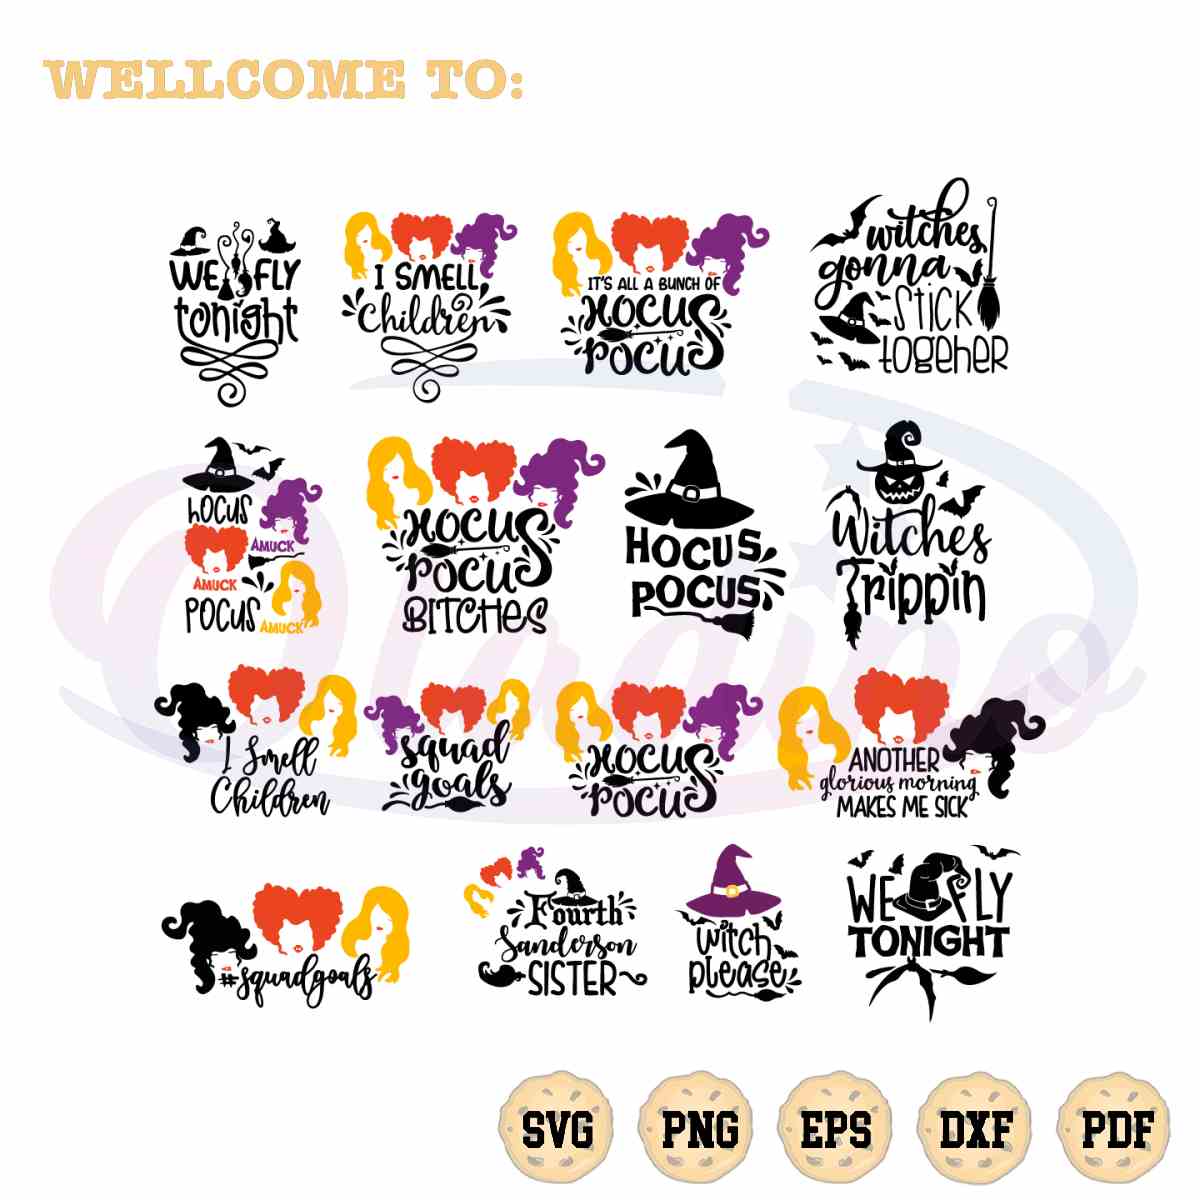 hocus-pocus-svg-bundle-sanderson-sisters-halloween-witches-cutting-file